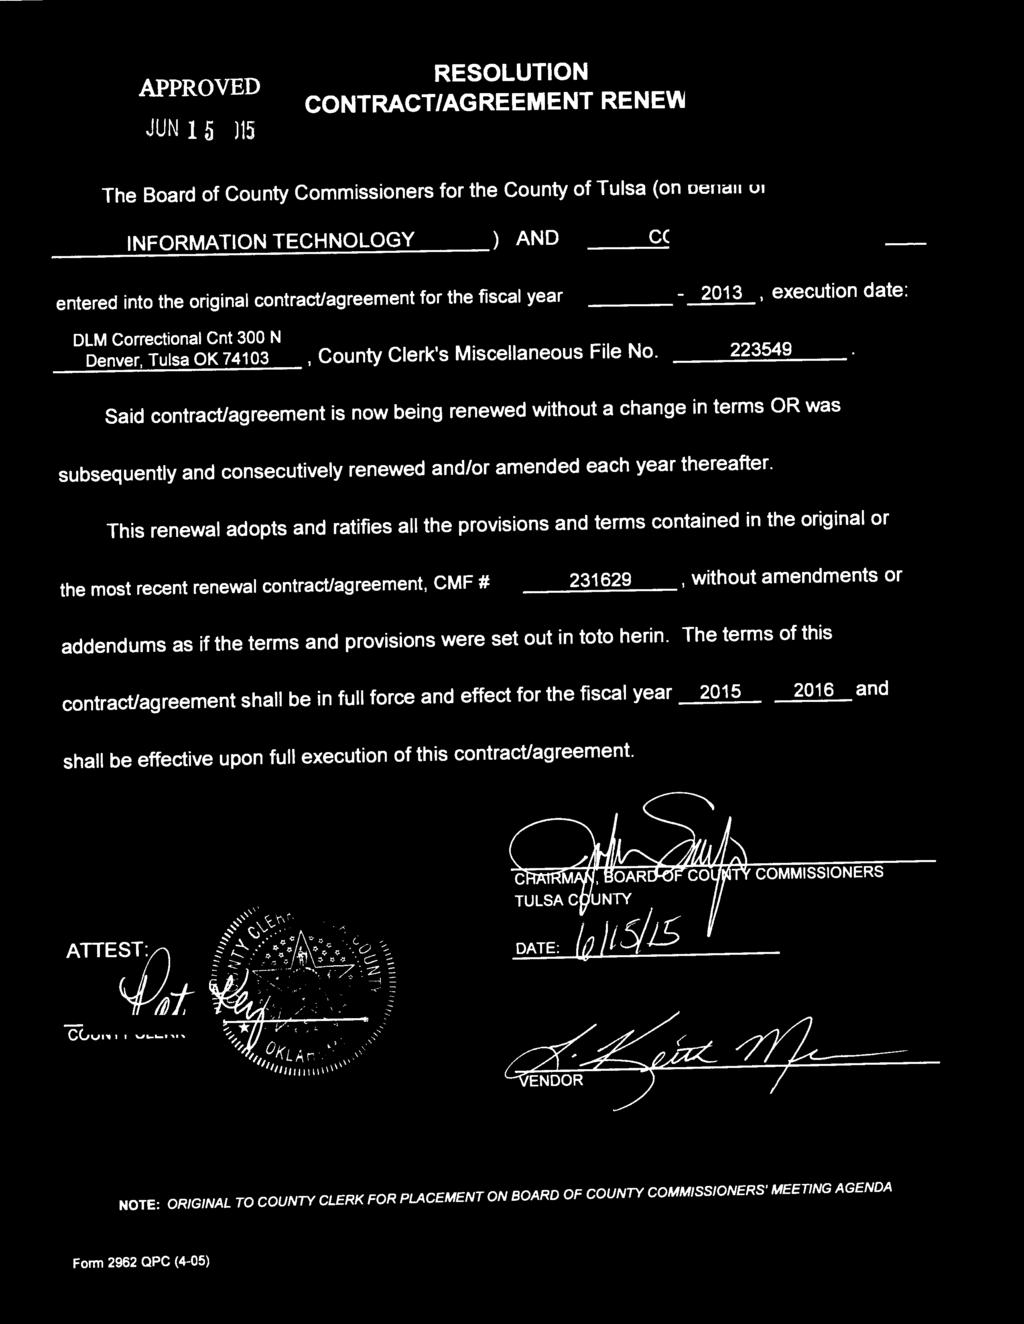 APPROVED JUN 15 2015 RESOLUTION CONTRACT/AGREEMENT RENEW.